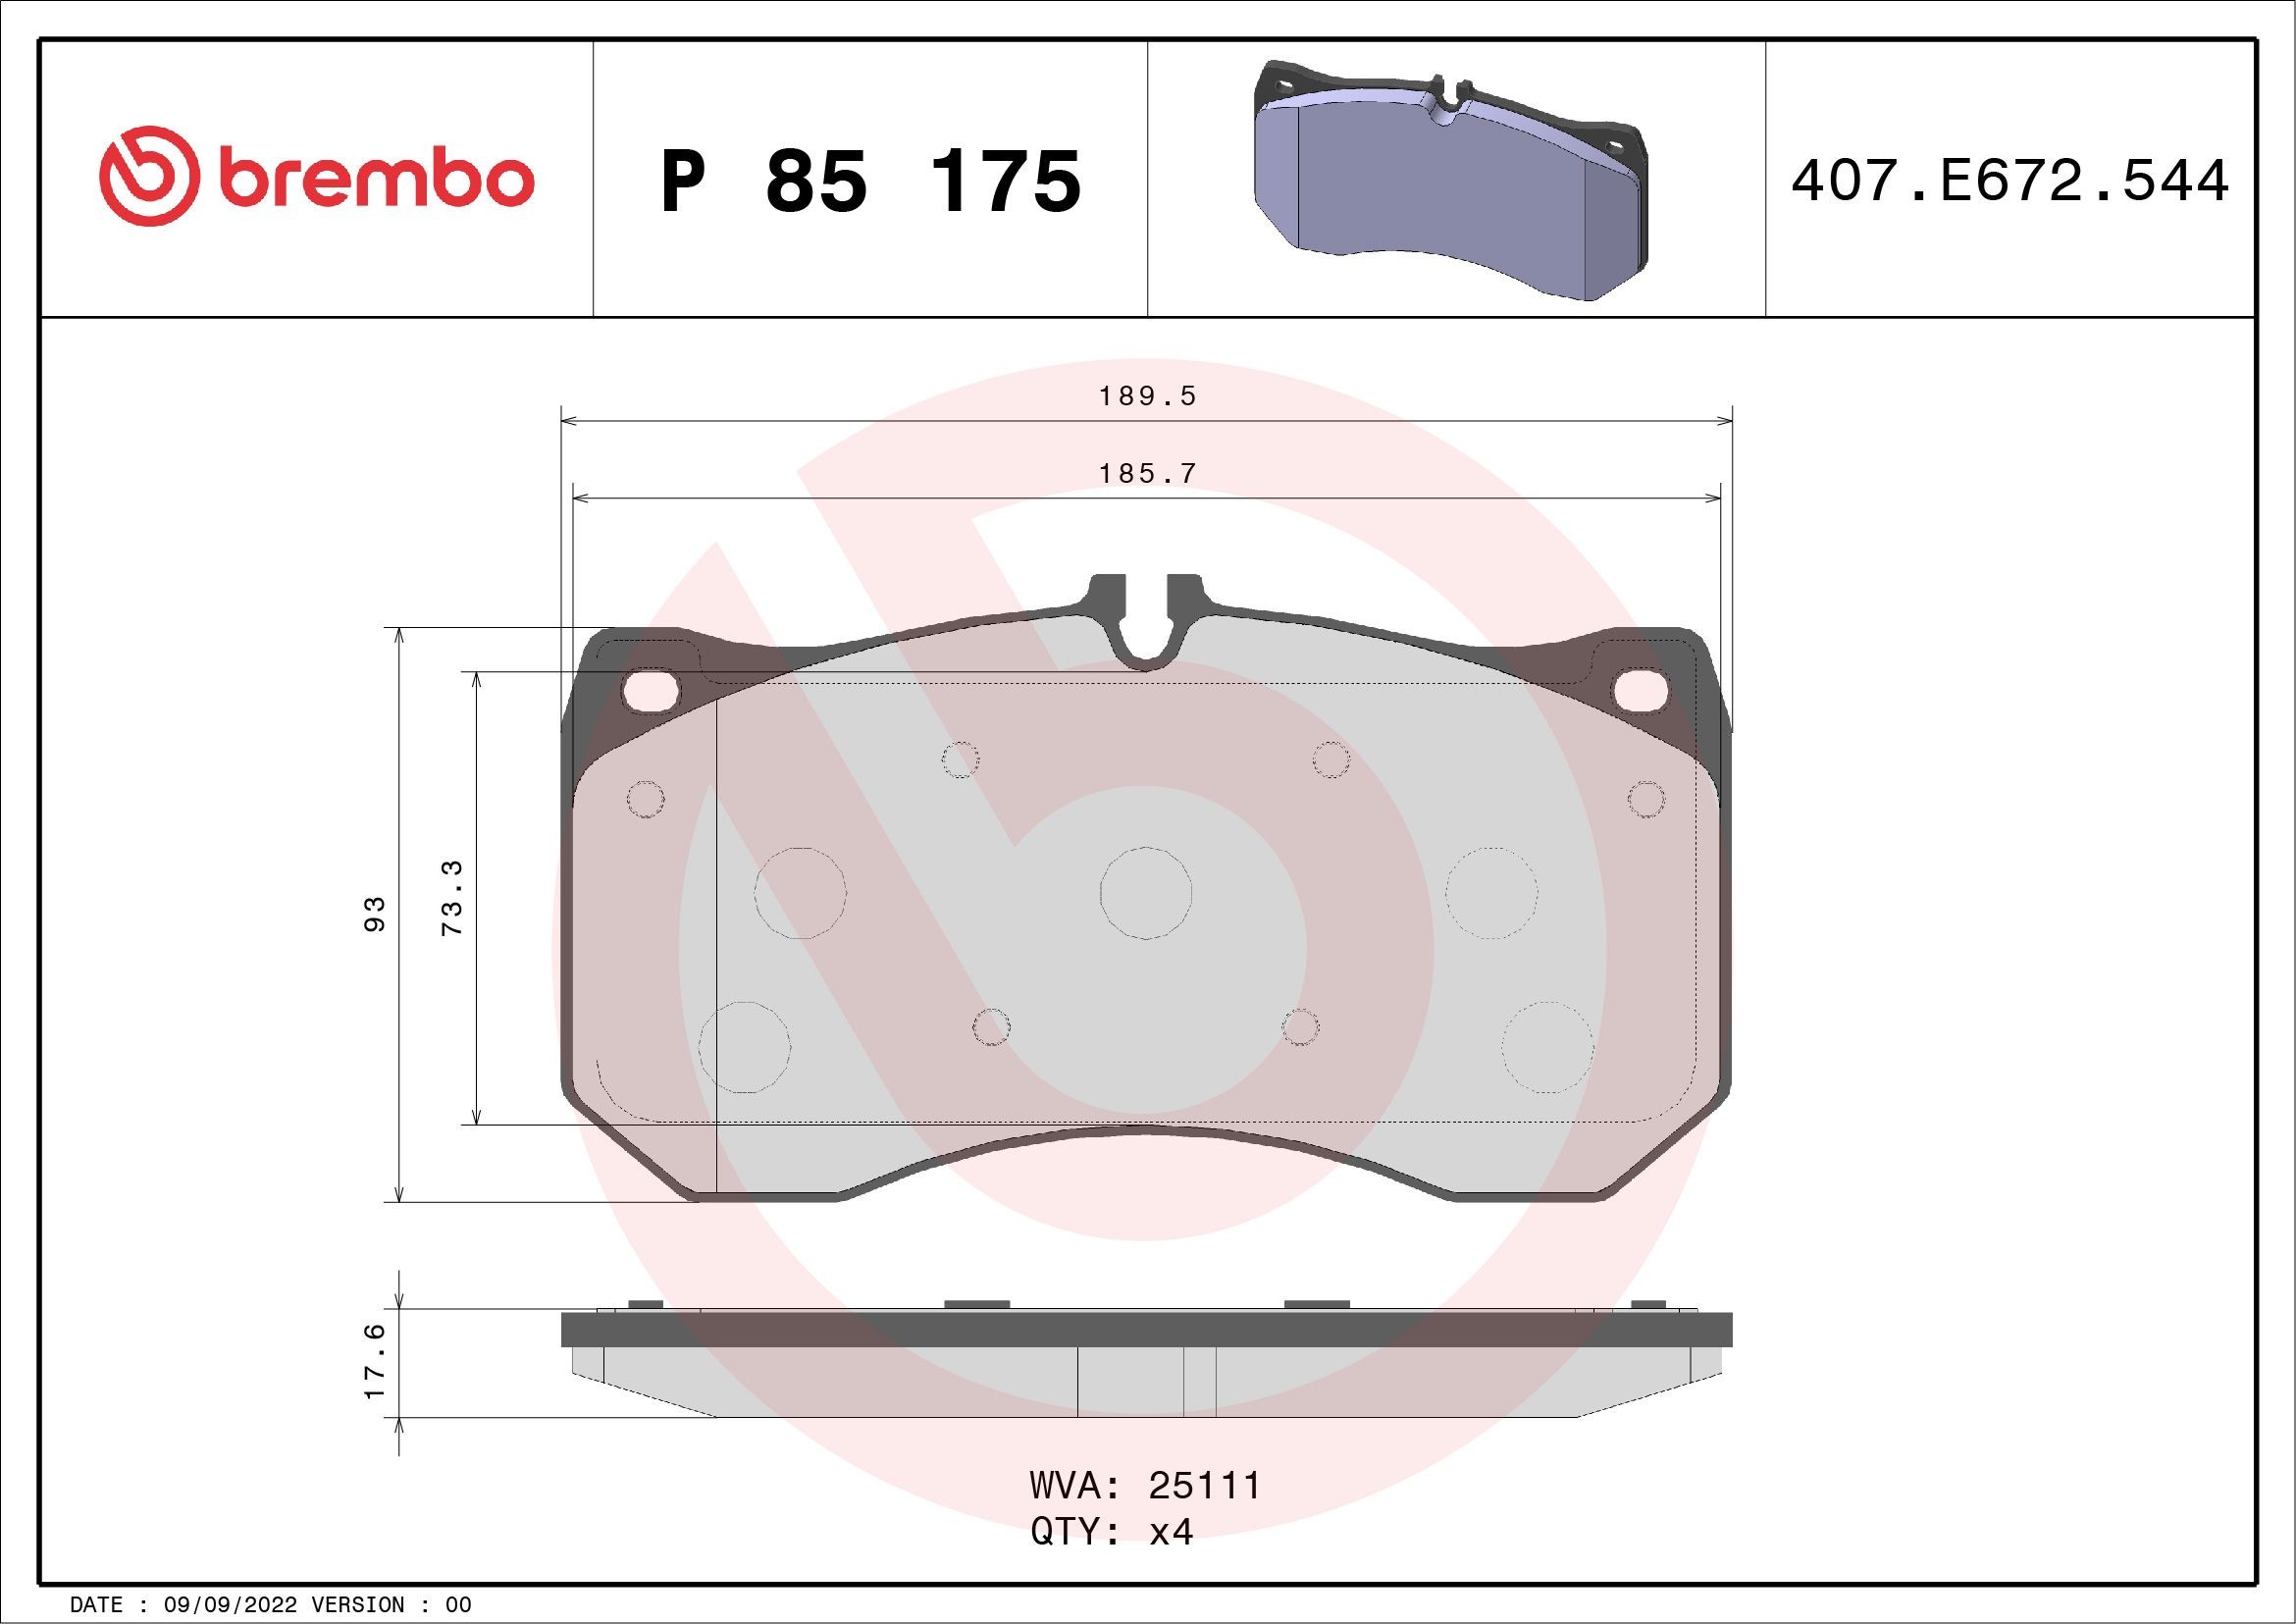 BREMBO P 85 175 Brake pad set prepared for wear indicator, without accessories